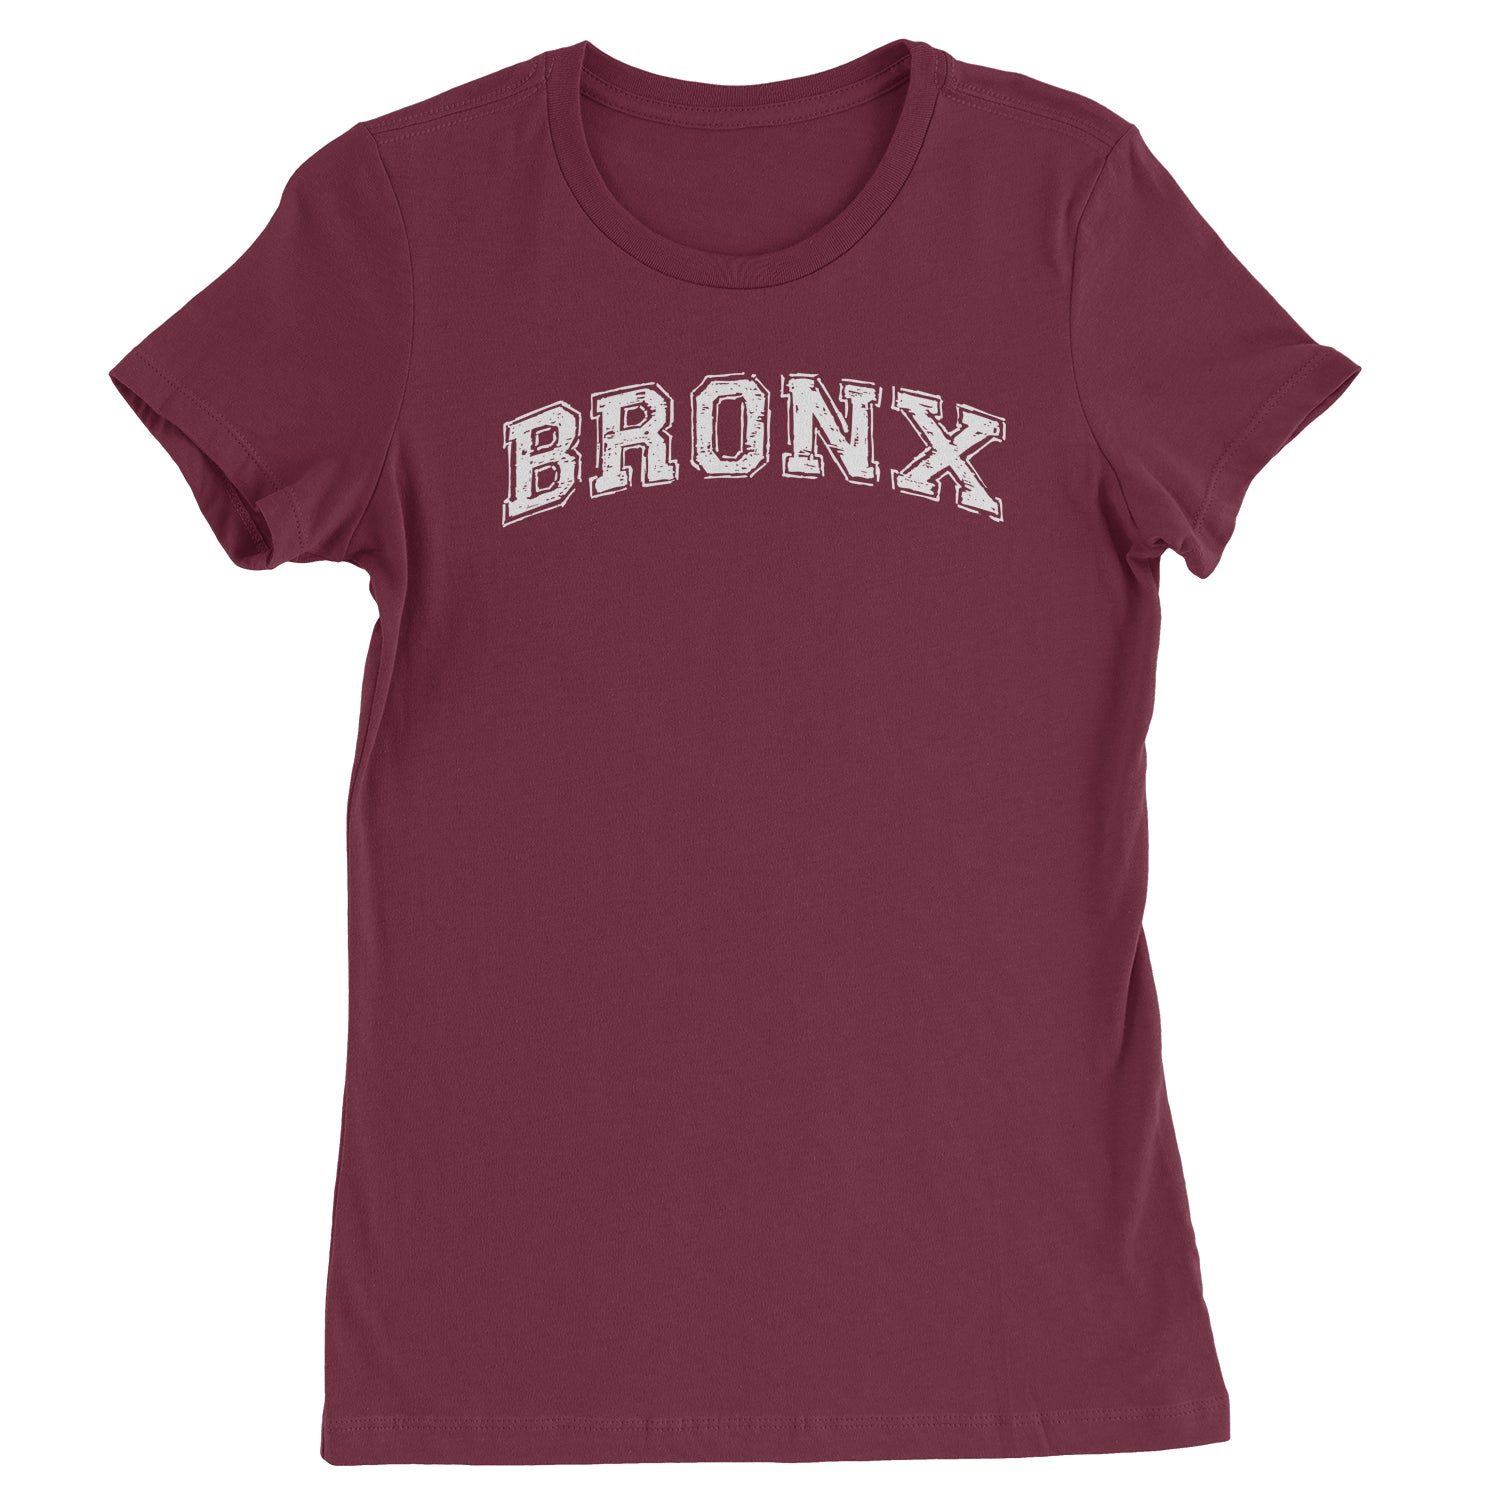 Bronx - From The Block Womens T-shirt b, cardi, concert, its, Jennifer, lopez, merch, my, party, tour by Expression Tees